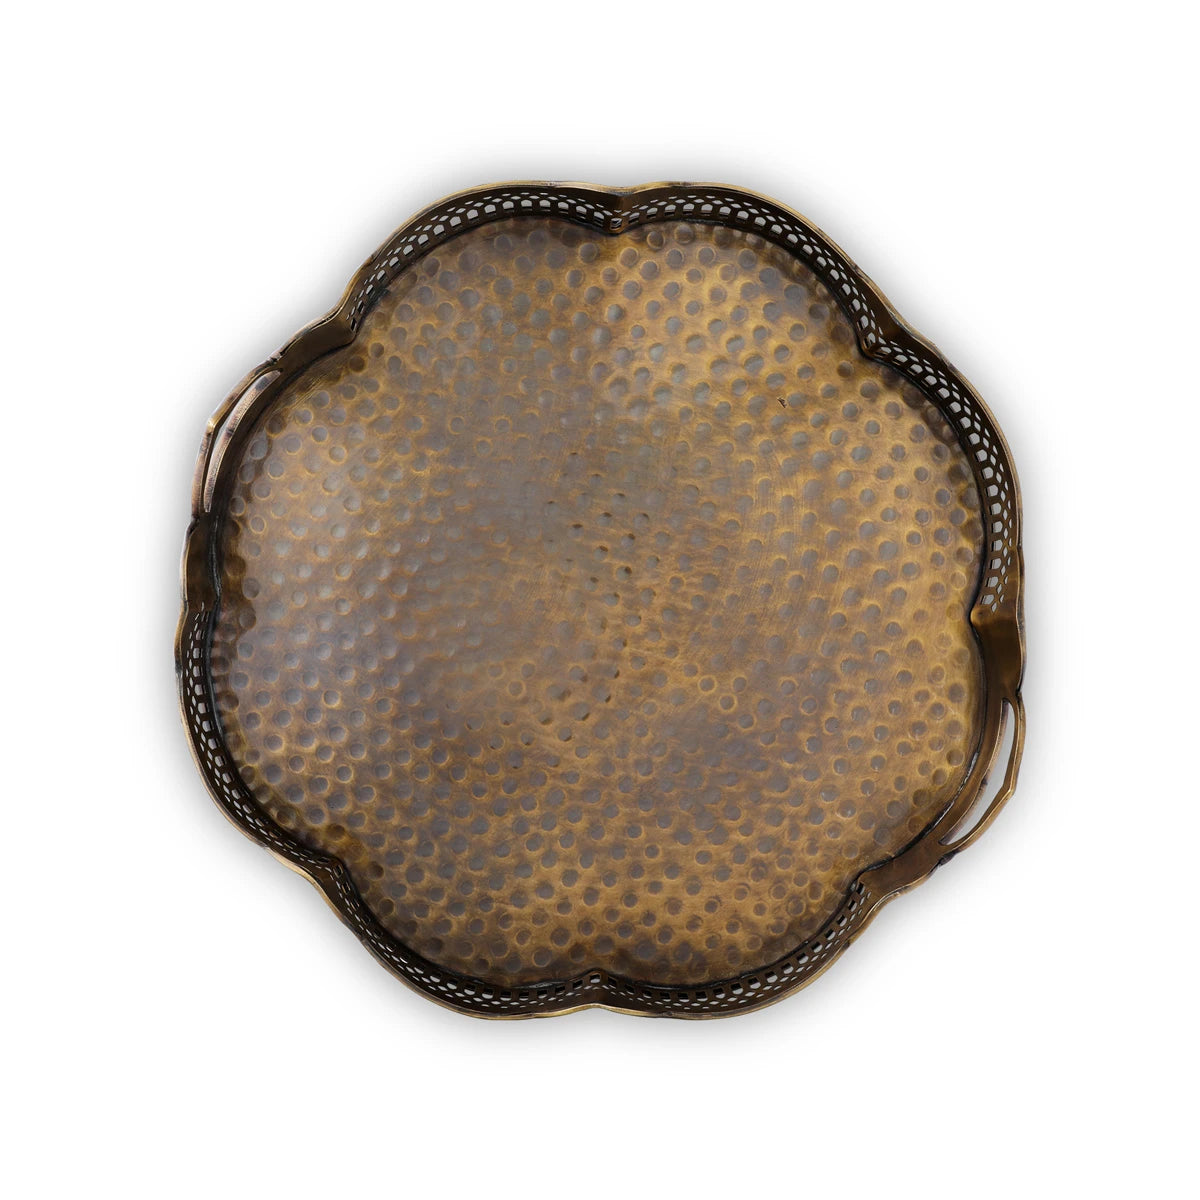 Top View of Antique Hammered Tray with arched Side railings showing raw and glossy Brass textures